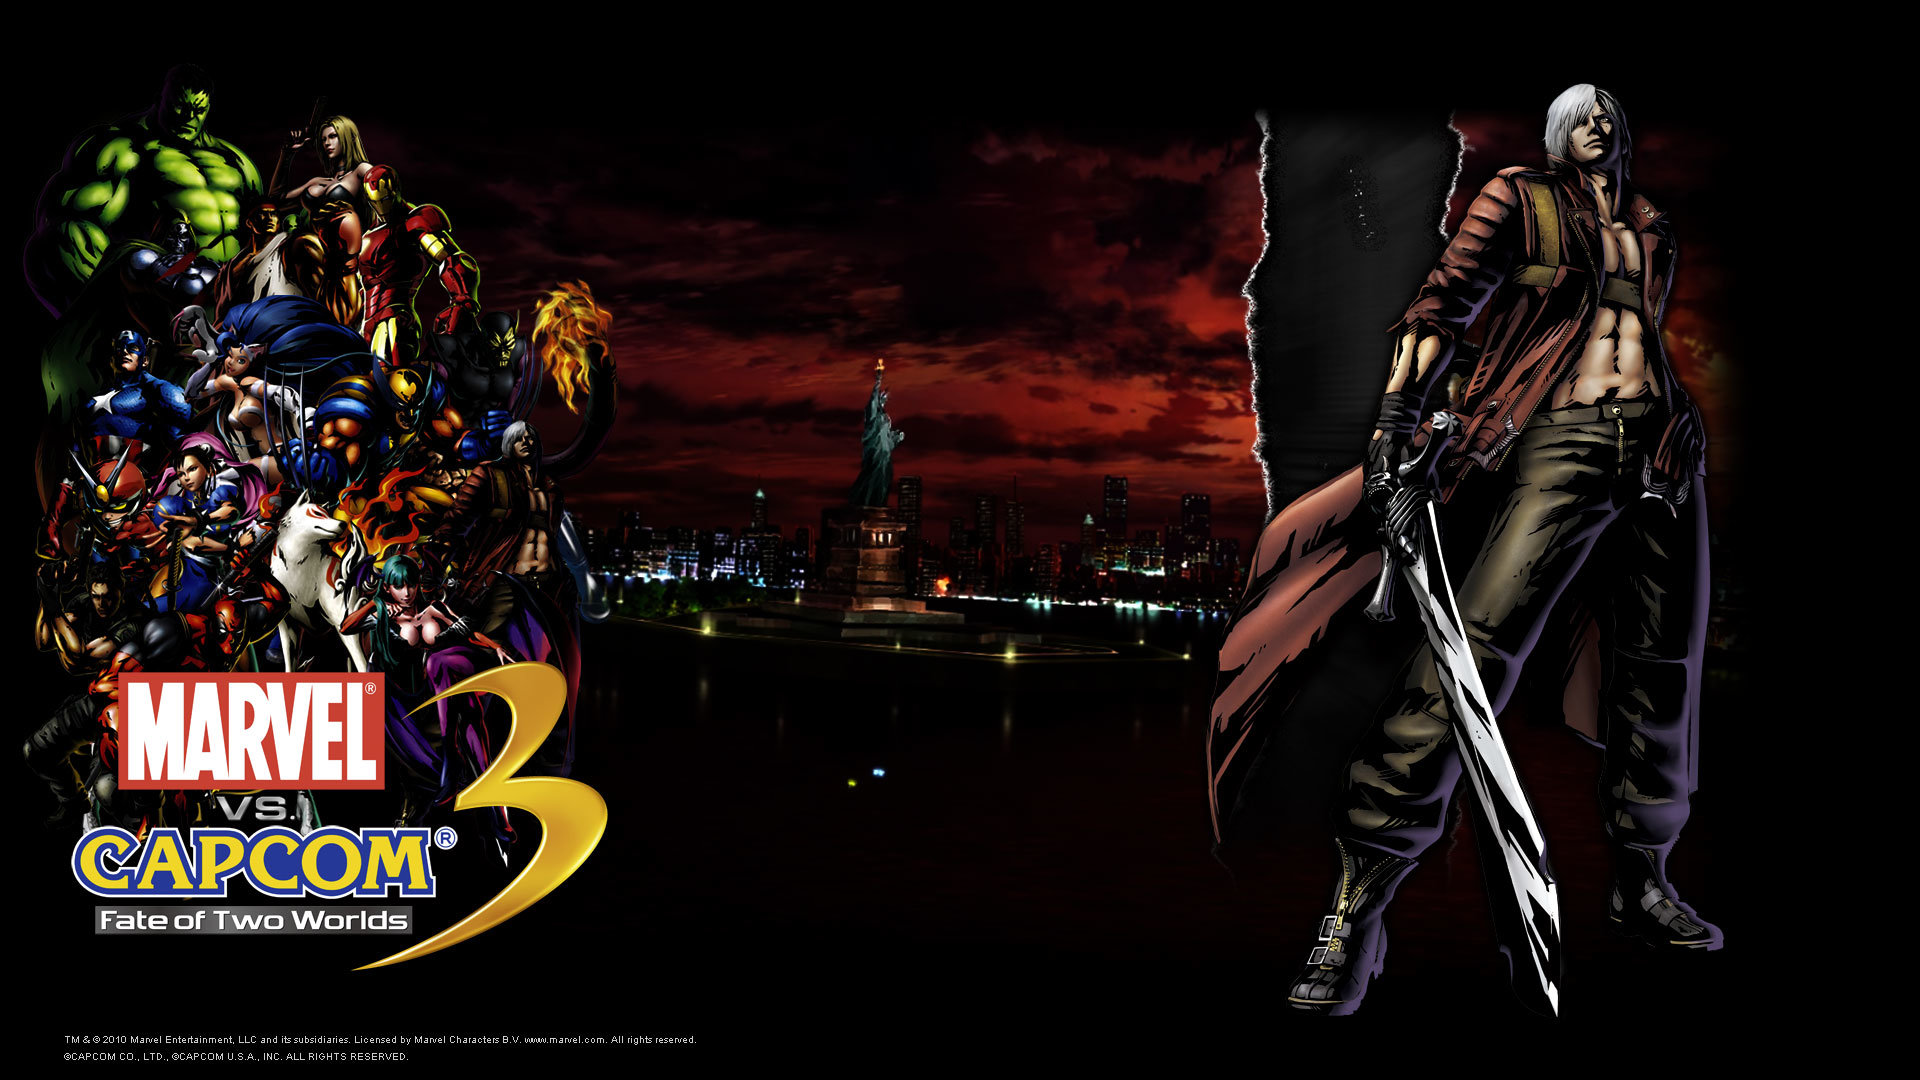 Download hd 1920x1080 Marvel Vs. Capcom 3: Fate Of Two Worlds desktop background ID:298427 for free